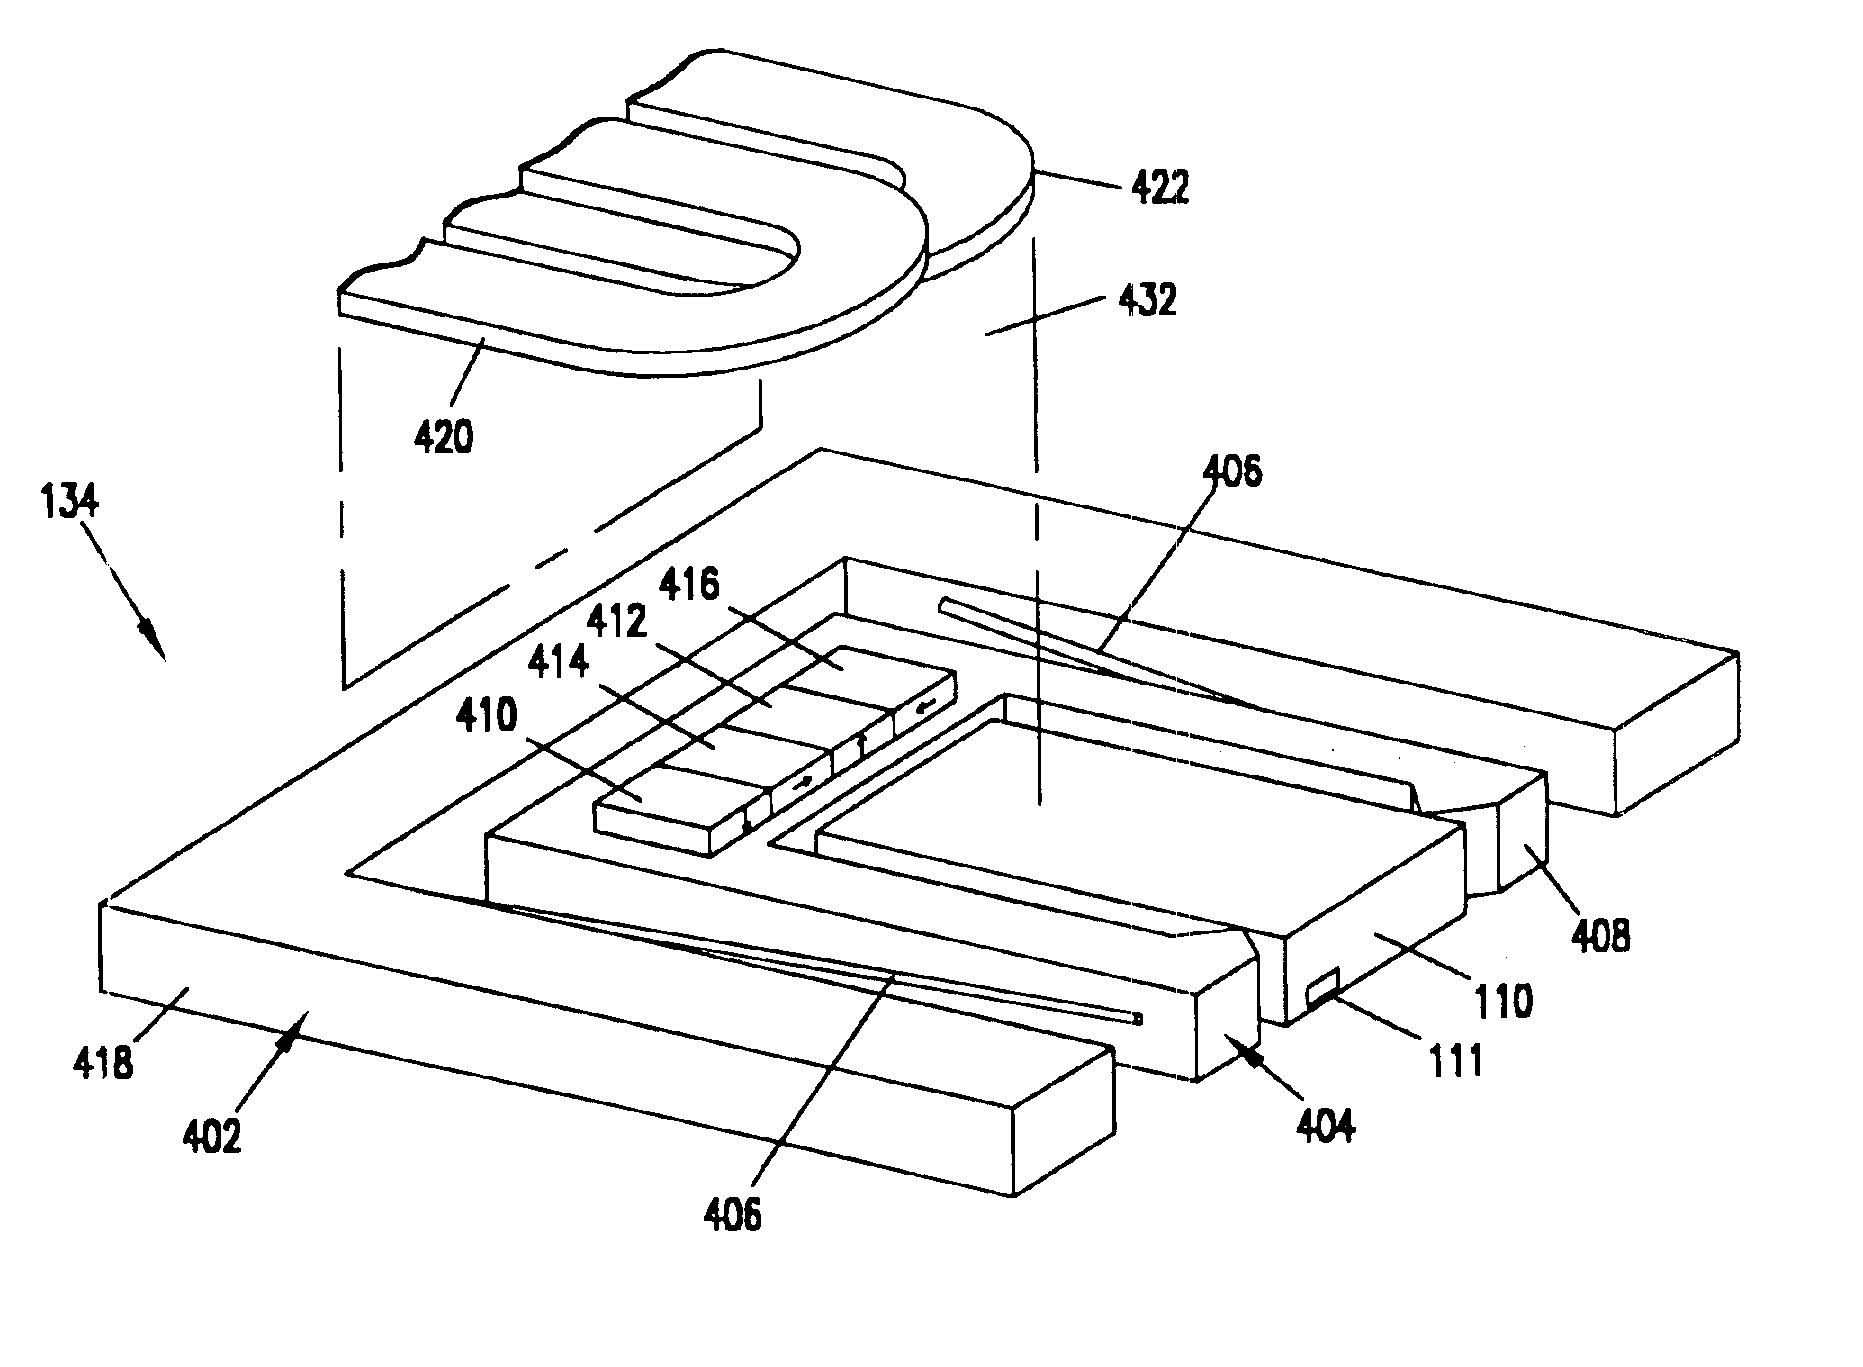 Slider level microactuator with integrated fly control